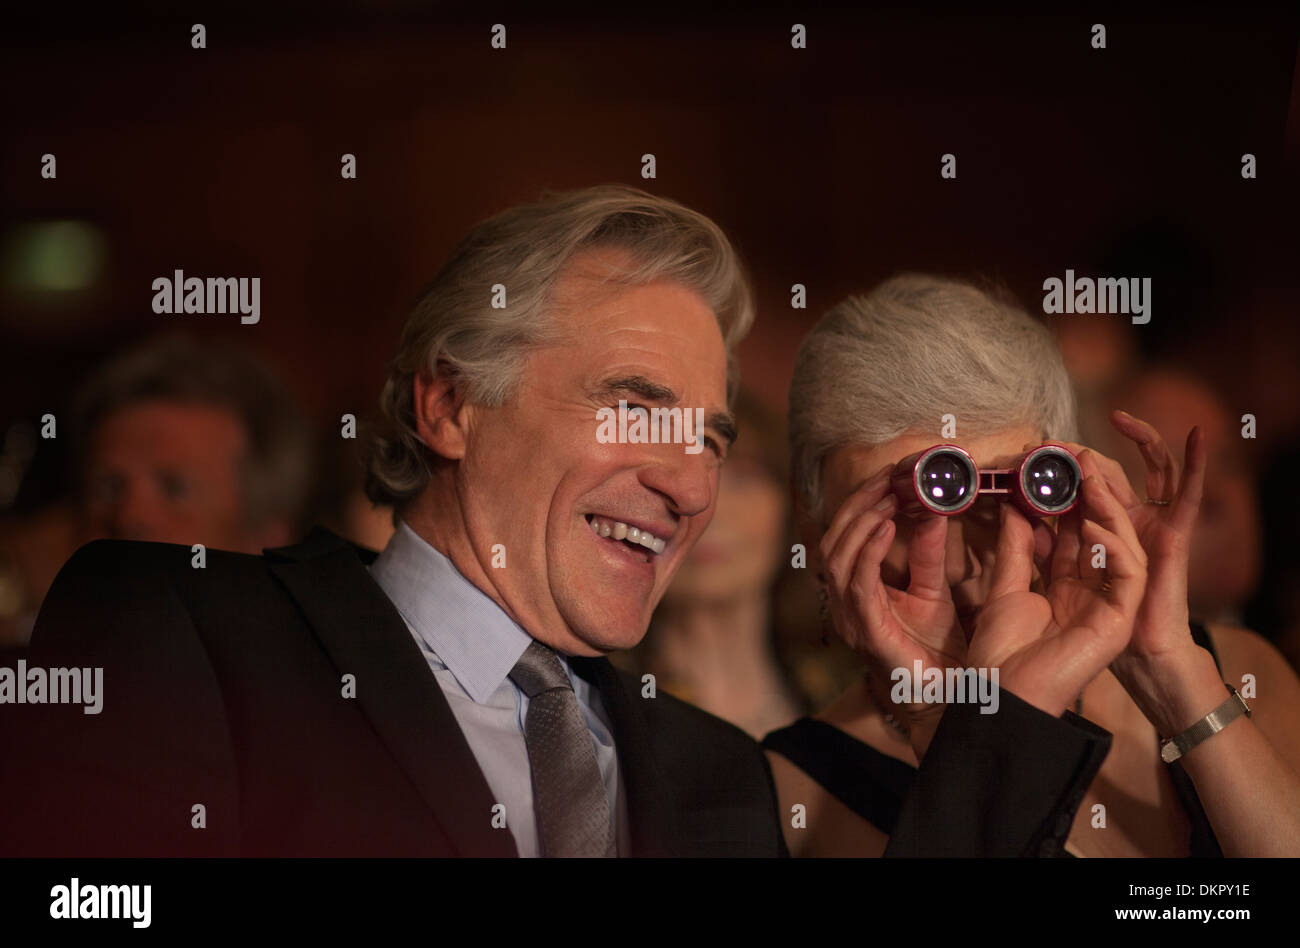 Close up of smiling couple using opera glasses in theater audience Banque D'Images